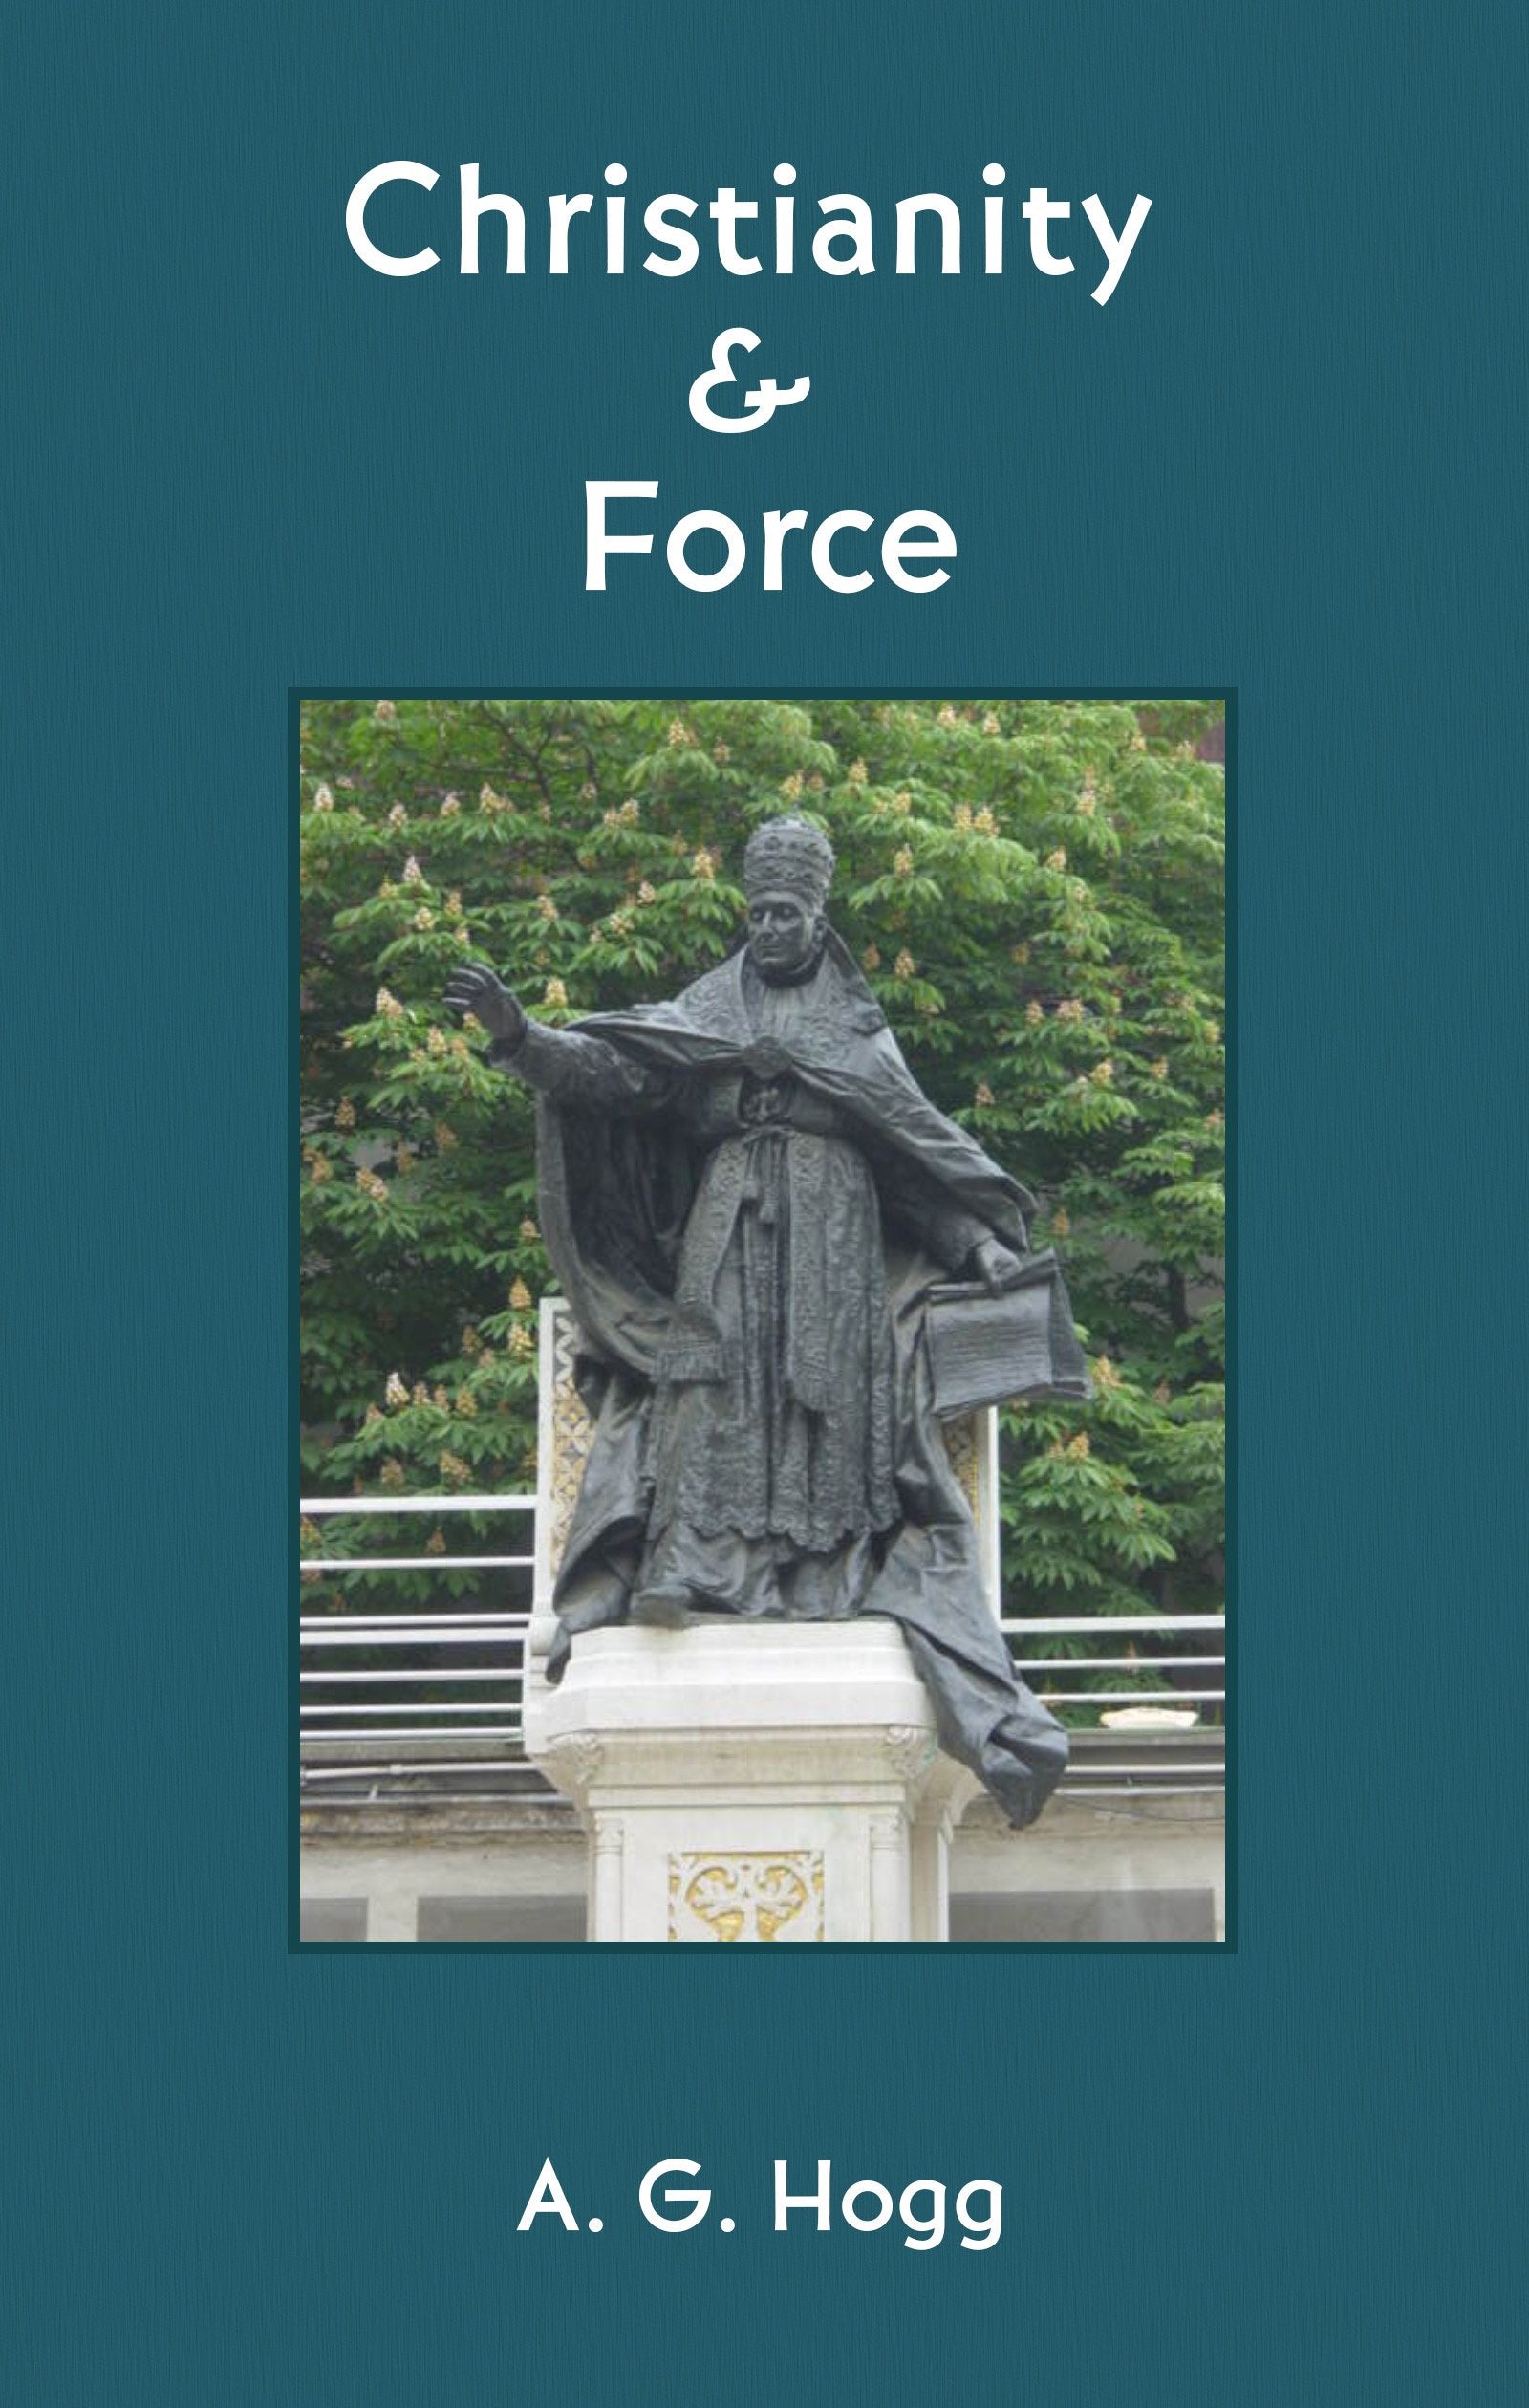 Christianity & Force